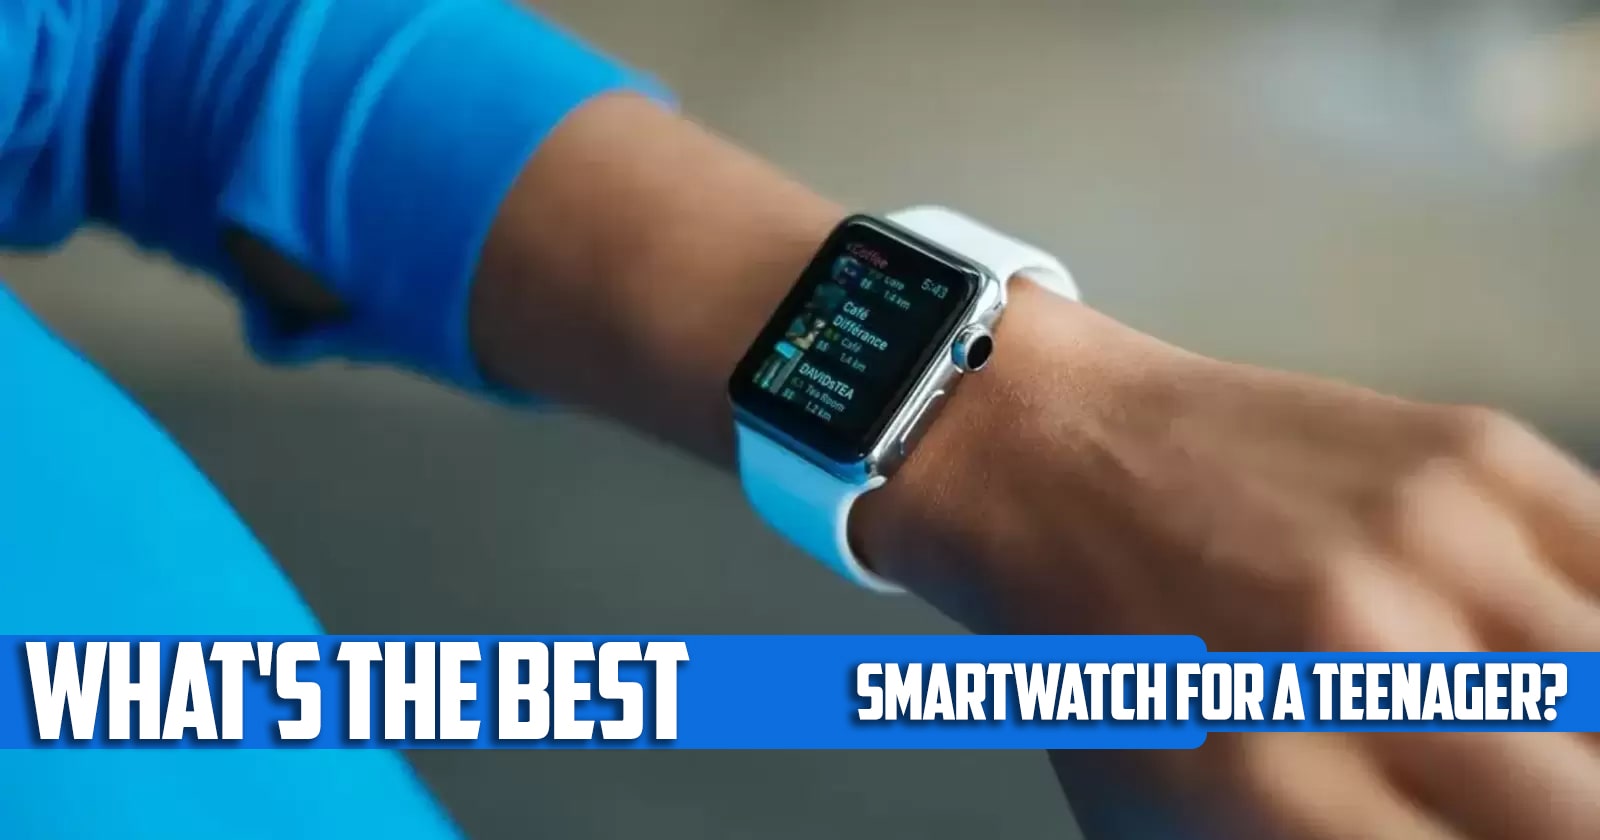 What's the best smartwatch for a teenager